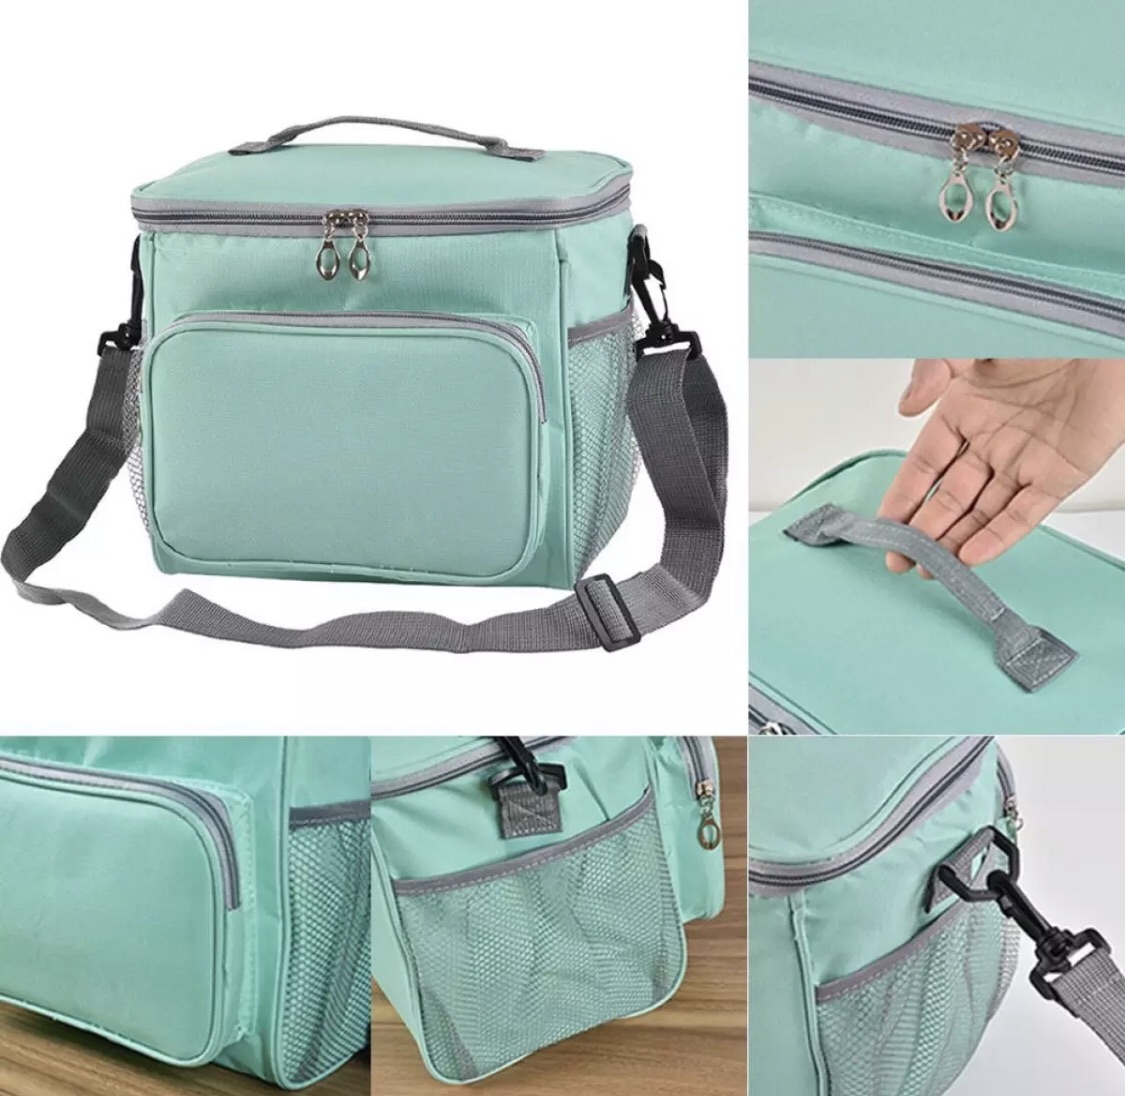 Waterproof Lunch Bag with Adjustable Storage - Brand: Oxford Cloth